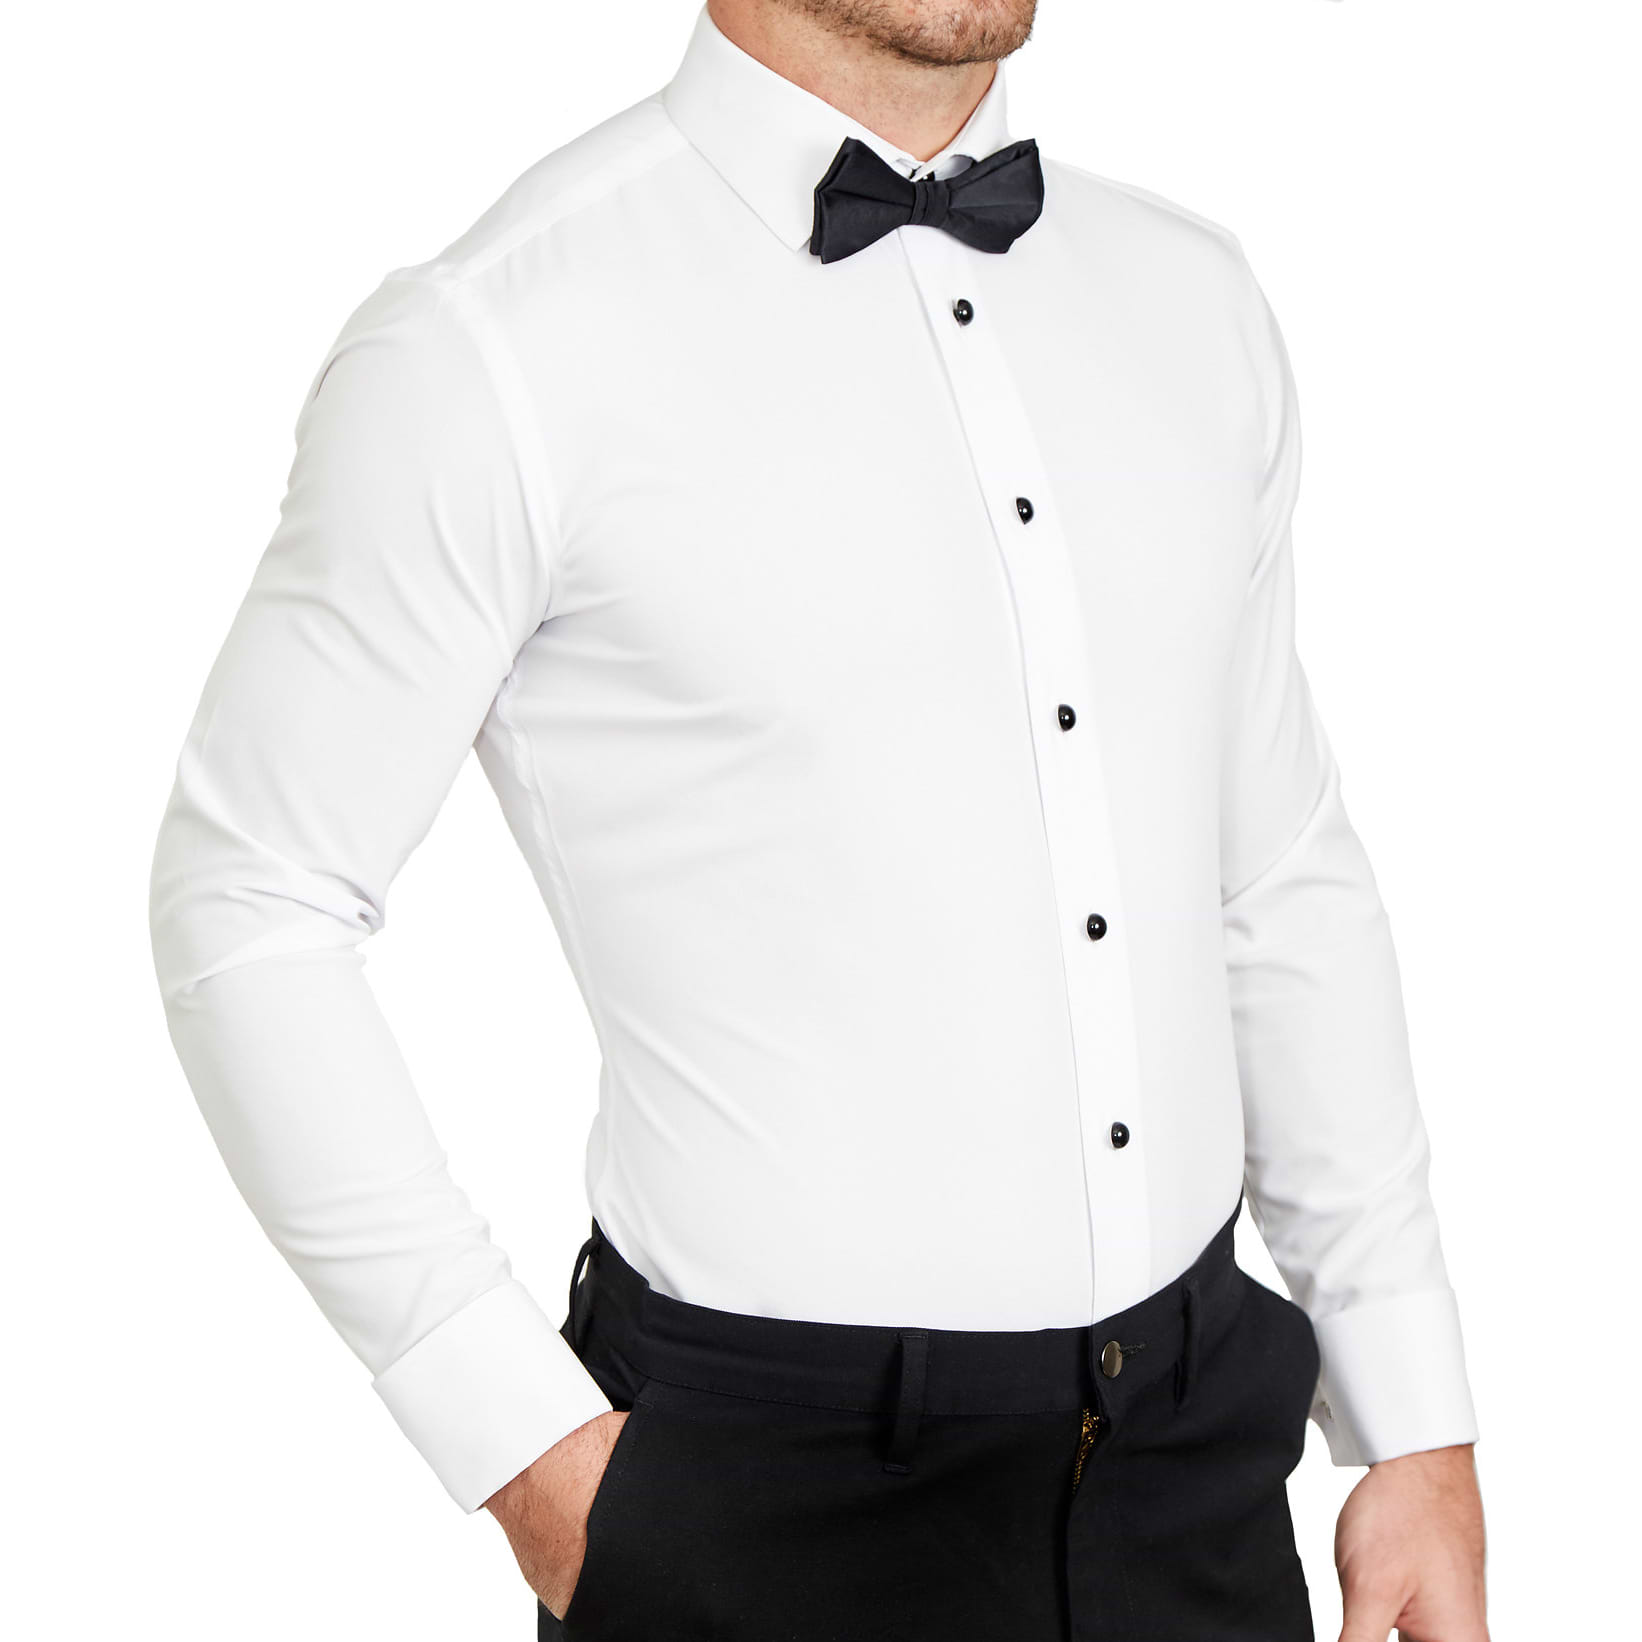 The Solid White Tuxedo Shirt - Made to Order